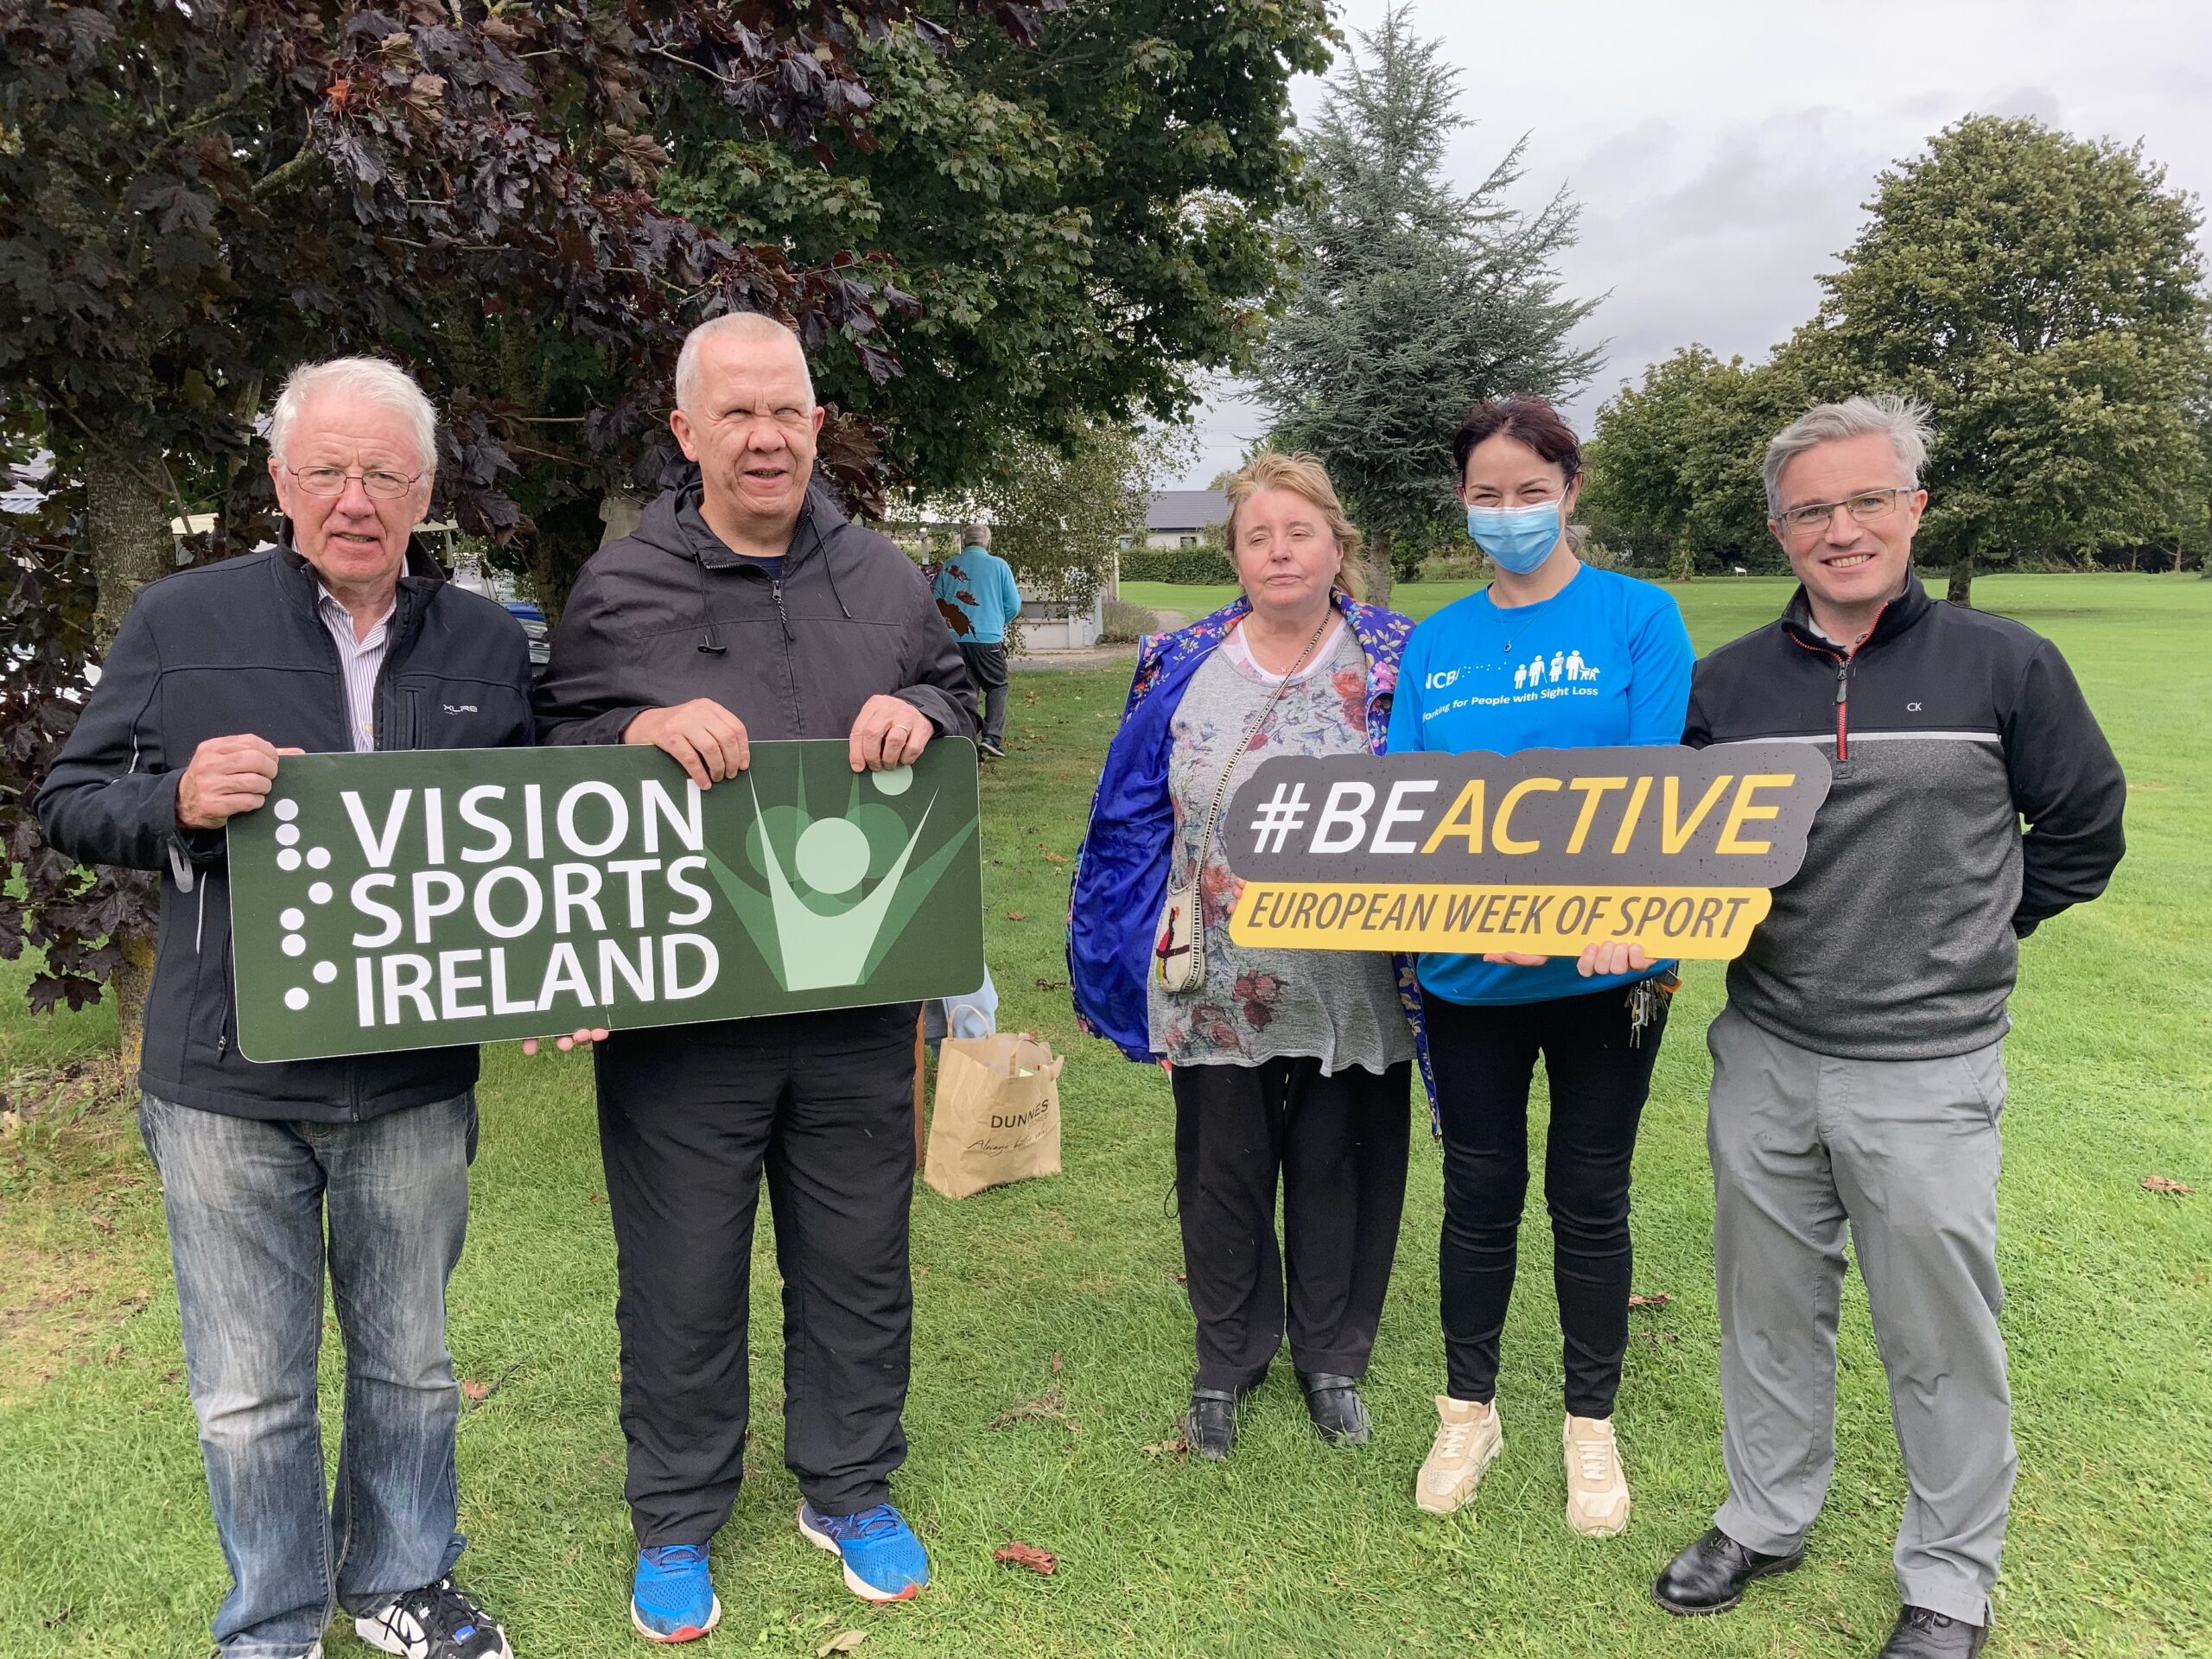 A group of men and women holding a Vision Sports Ireland sign and a #BeActive sign while standing on a golf course